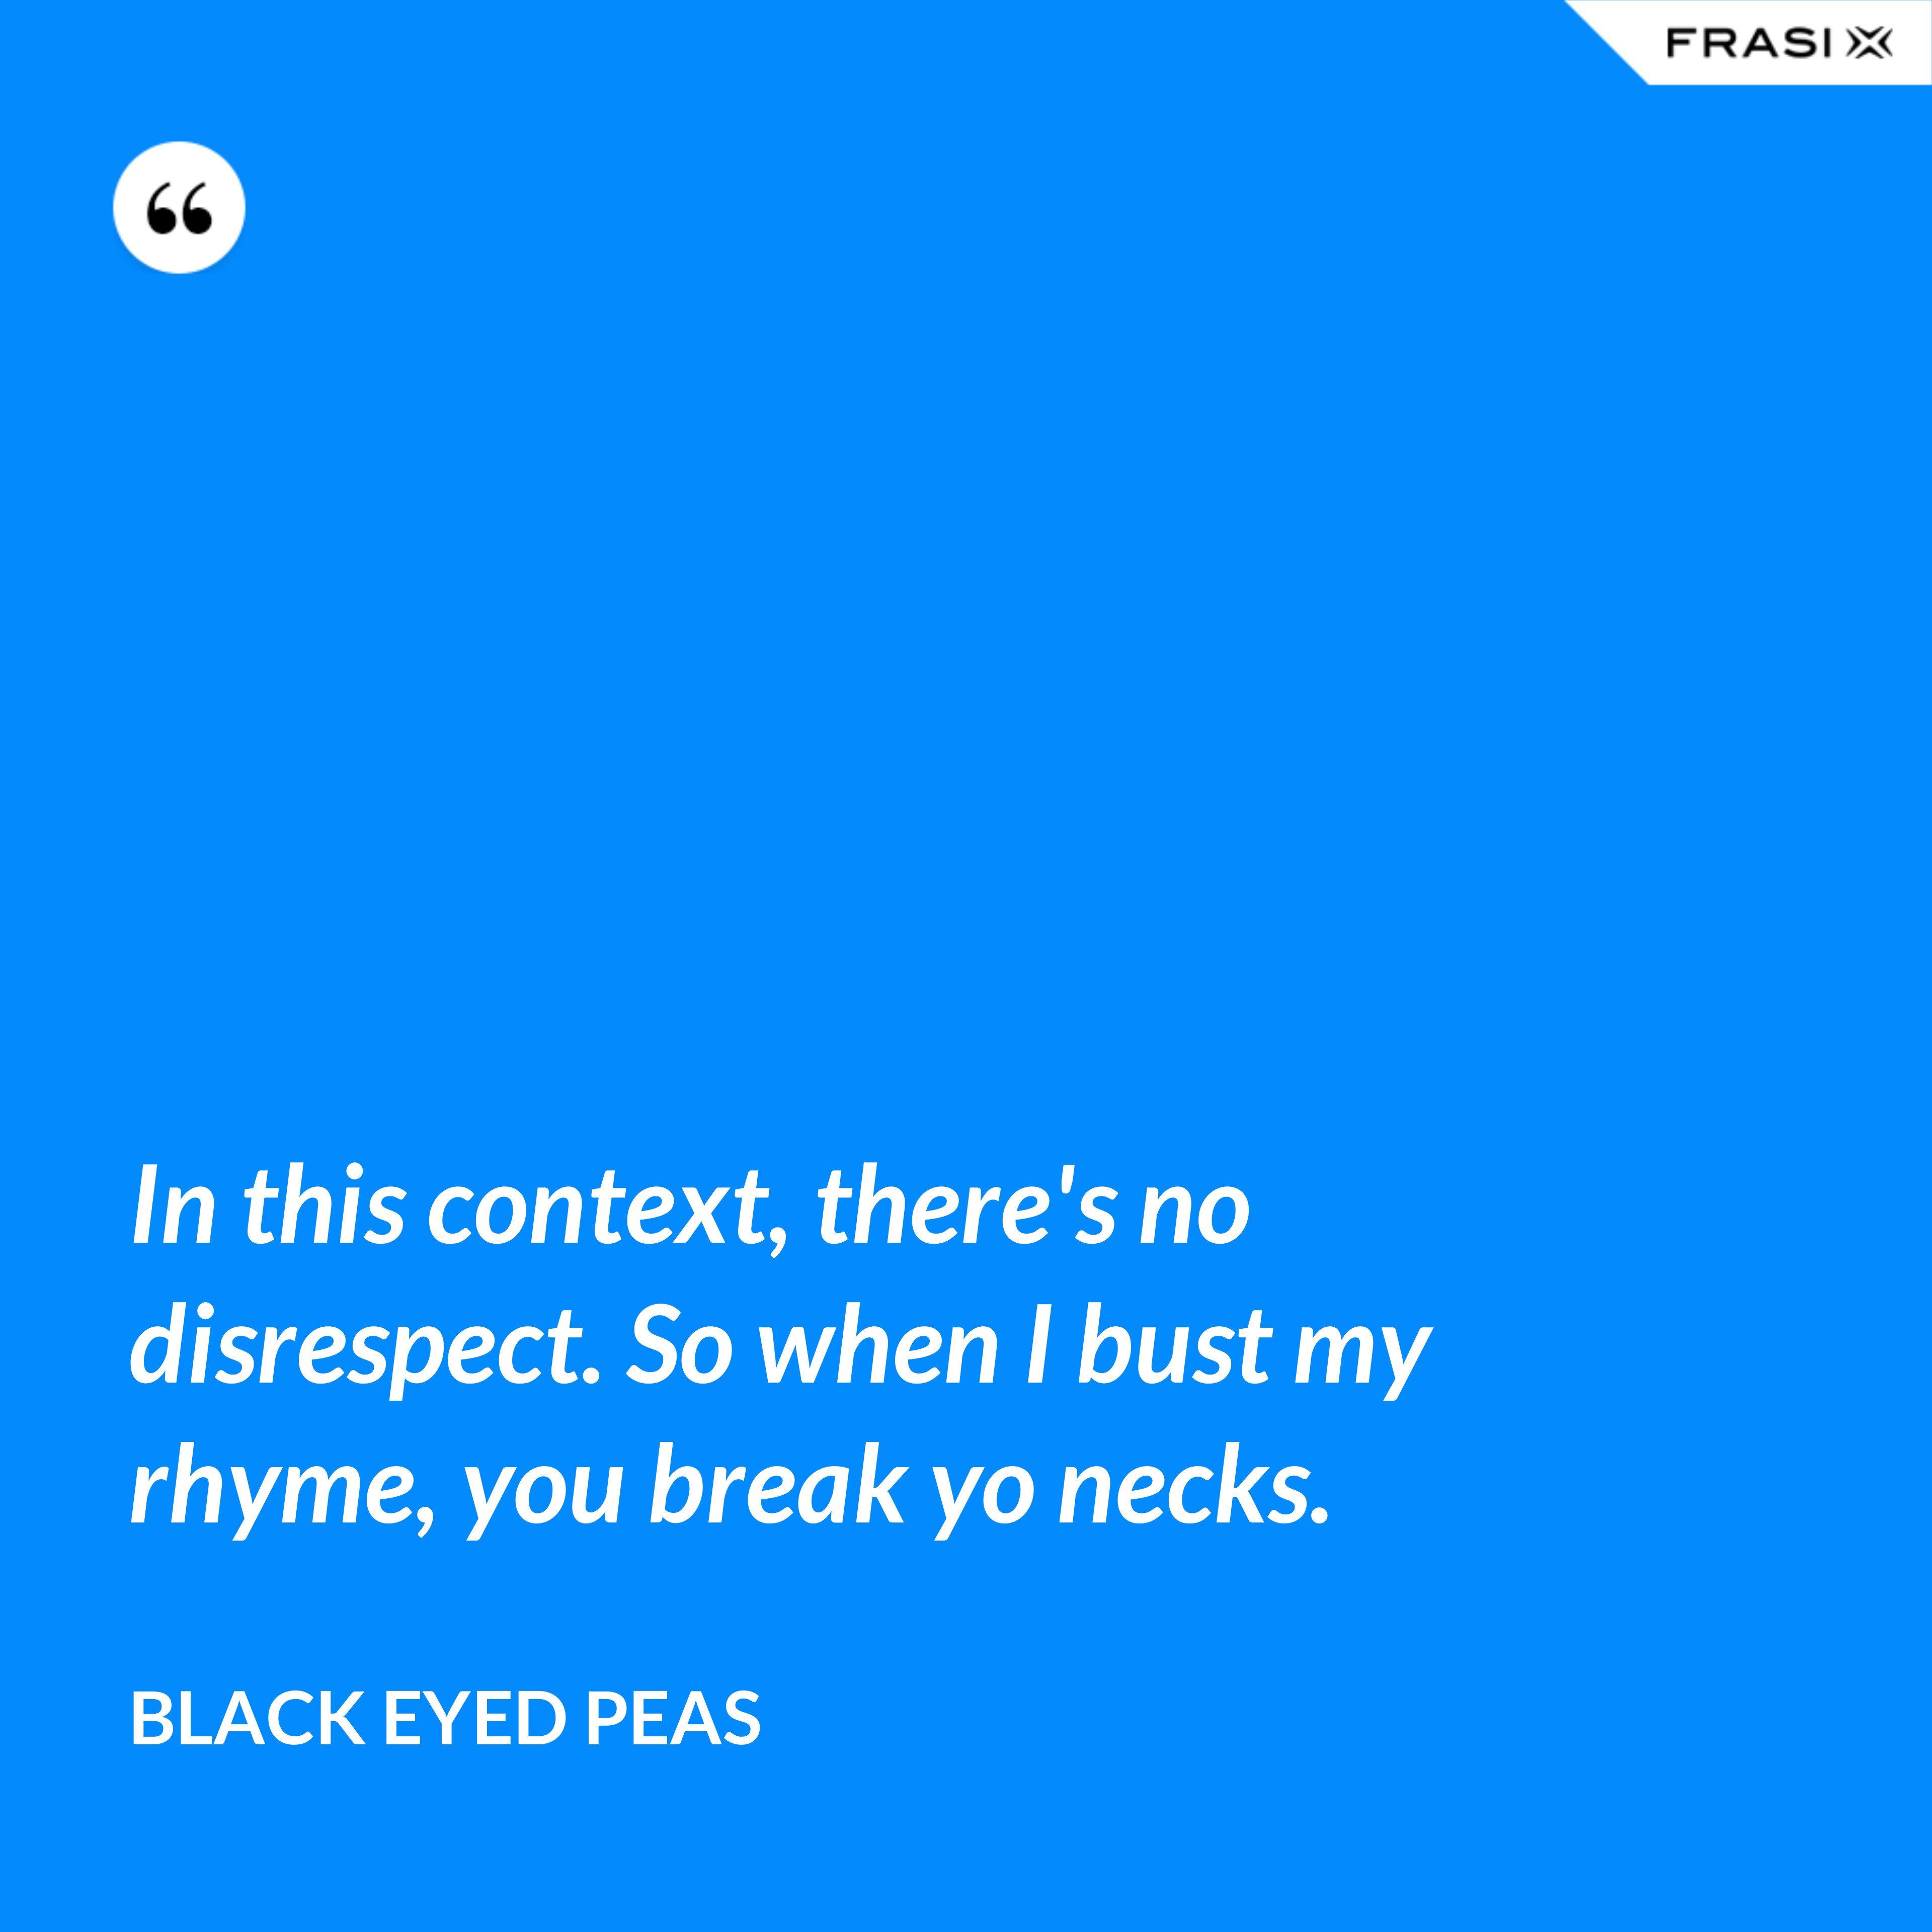 In this context, there's no disrespect. So when I bust my rhyme, you break yo necks. - Black Eyed Peas